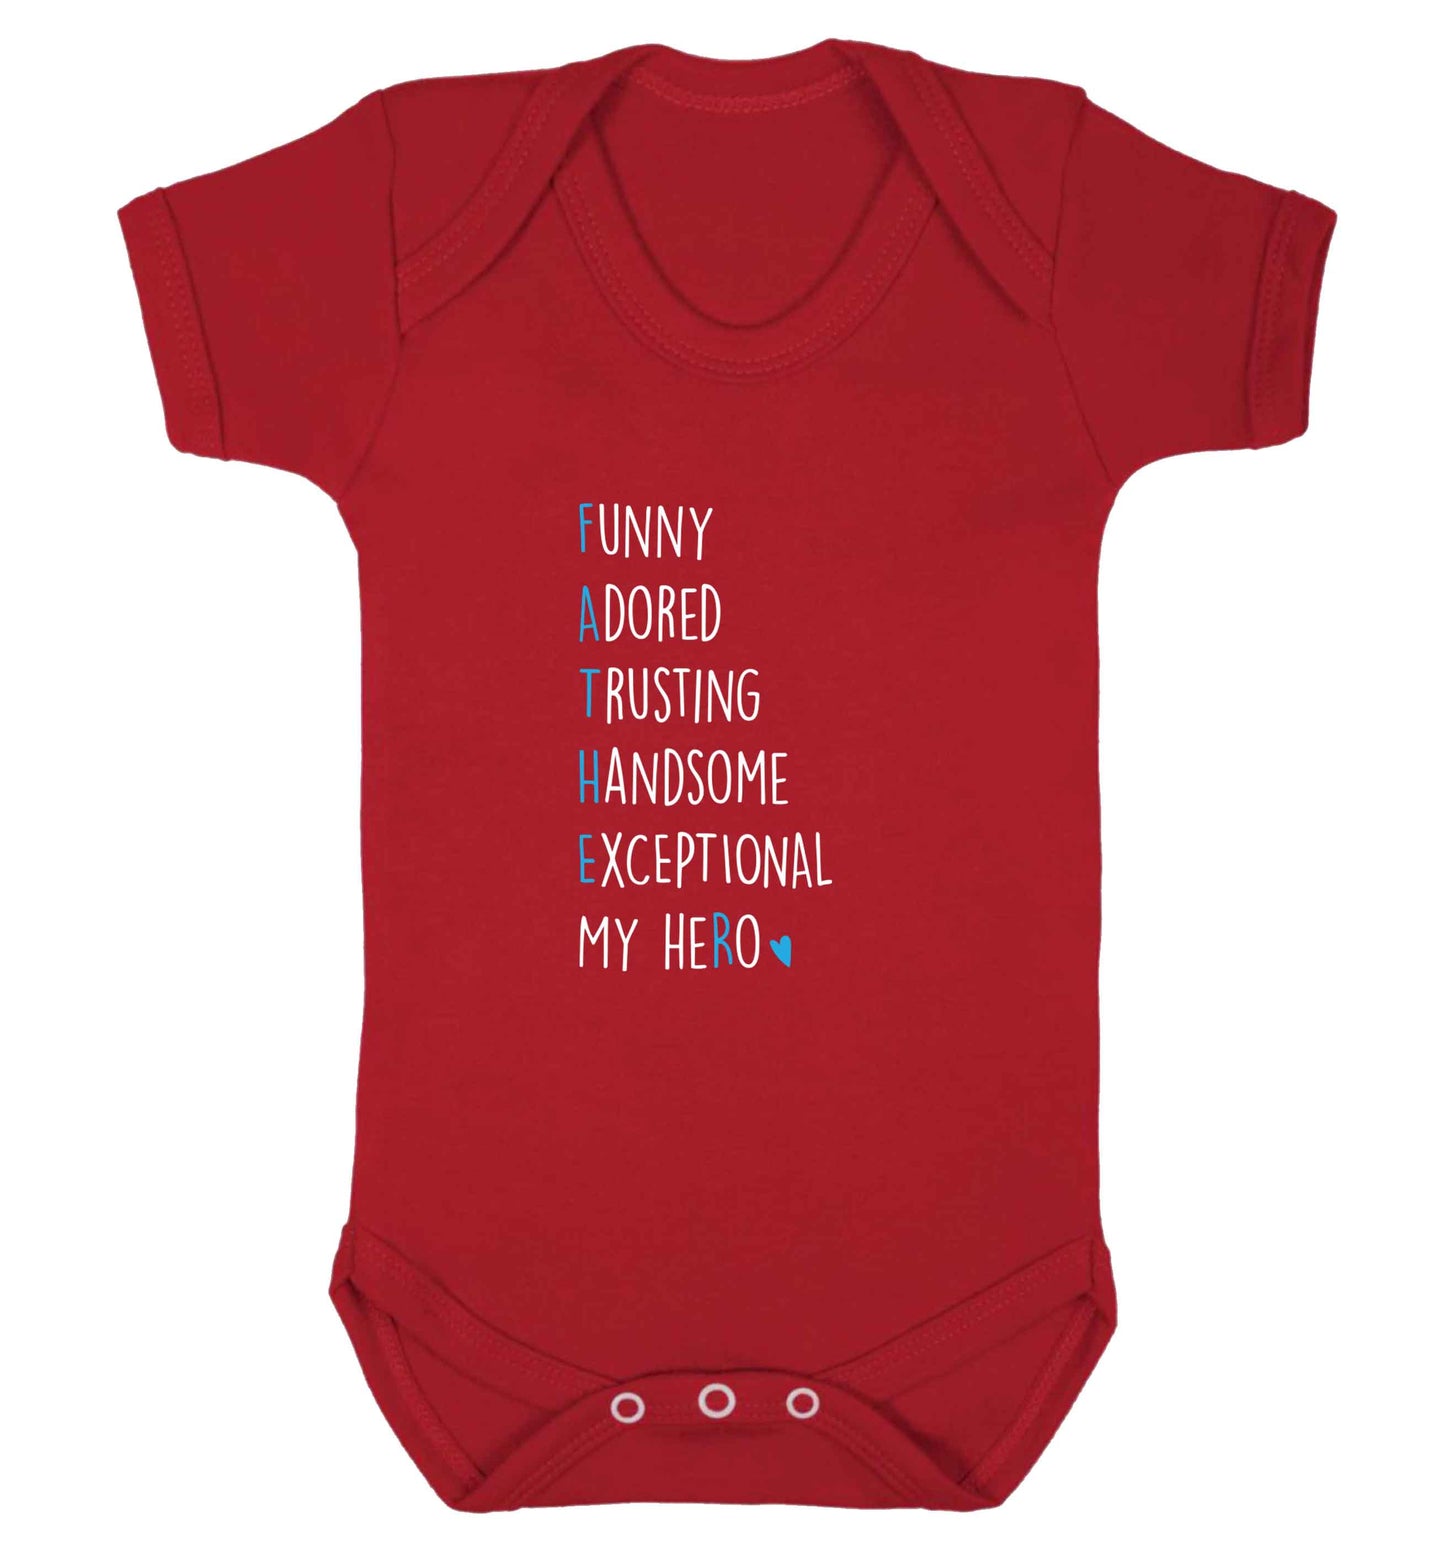 Father meaning hero acrostic poem baby vest red 18-24 months